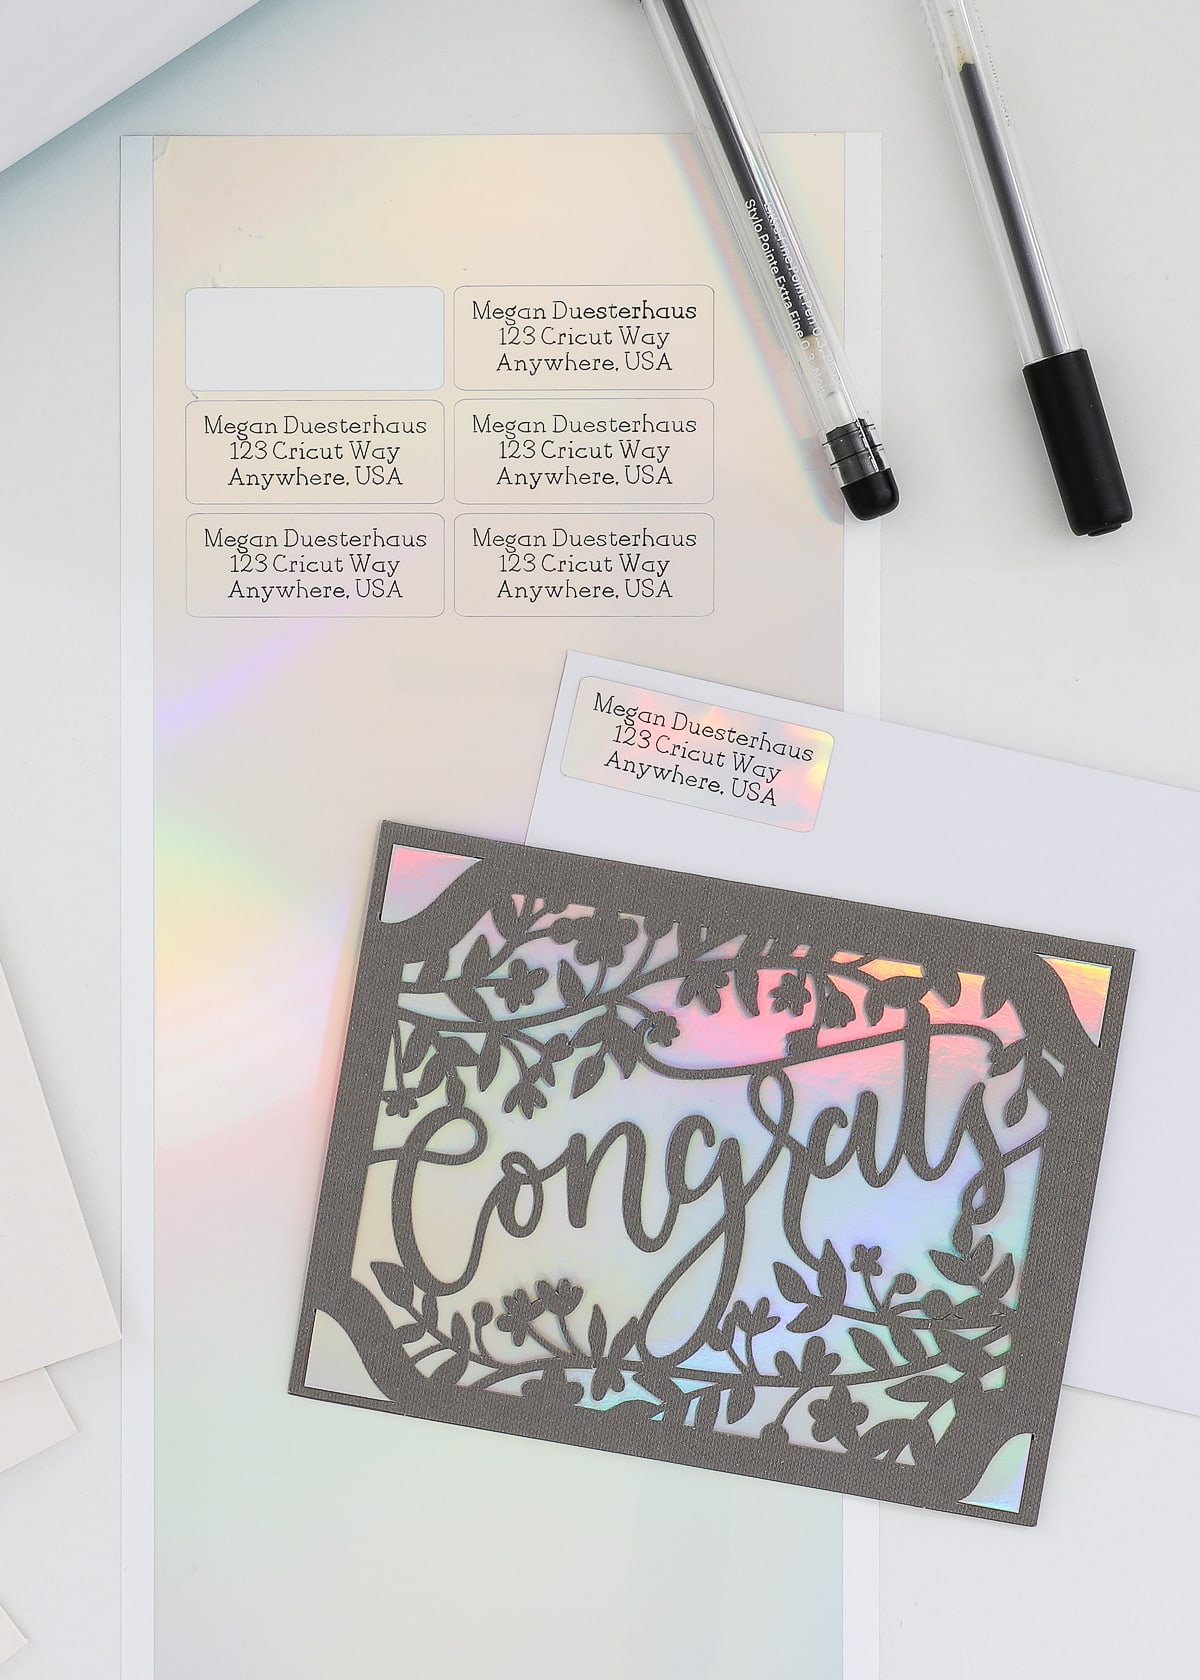 How to Easily Re-stick Your Cricut Joy Card Mat - Conquer Your